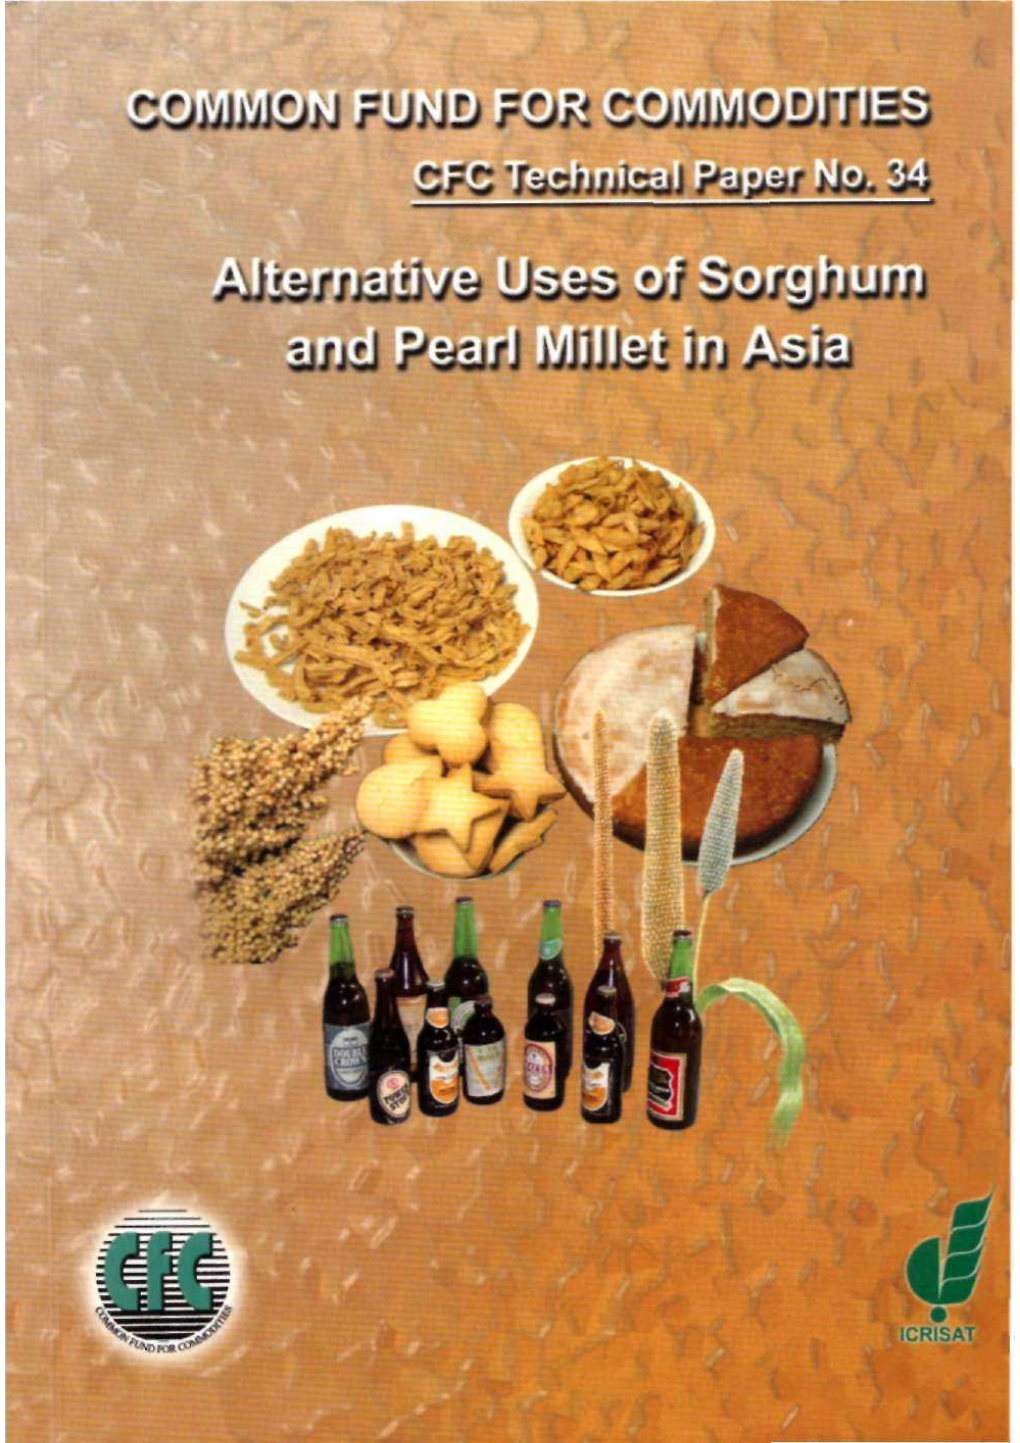 Alternative Uses of Sorghum and Pearl Millet in Asia